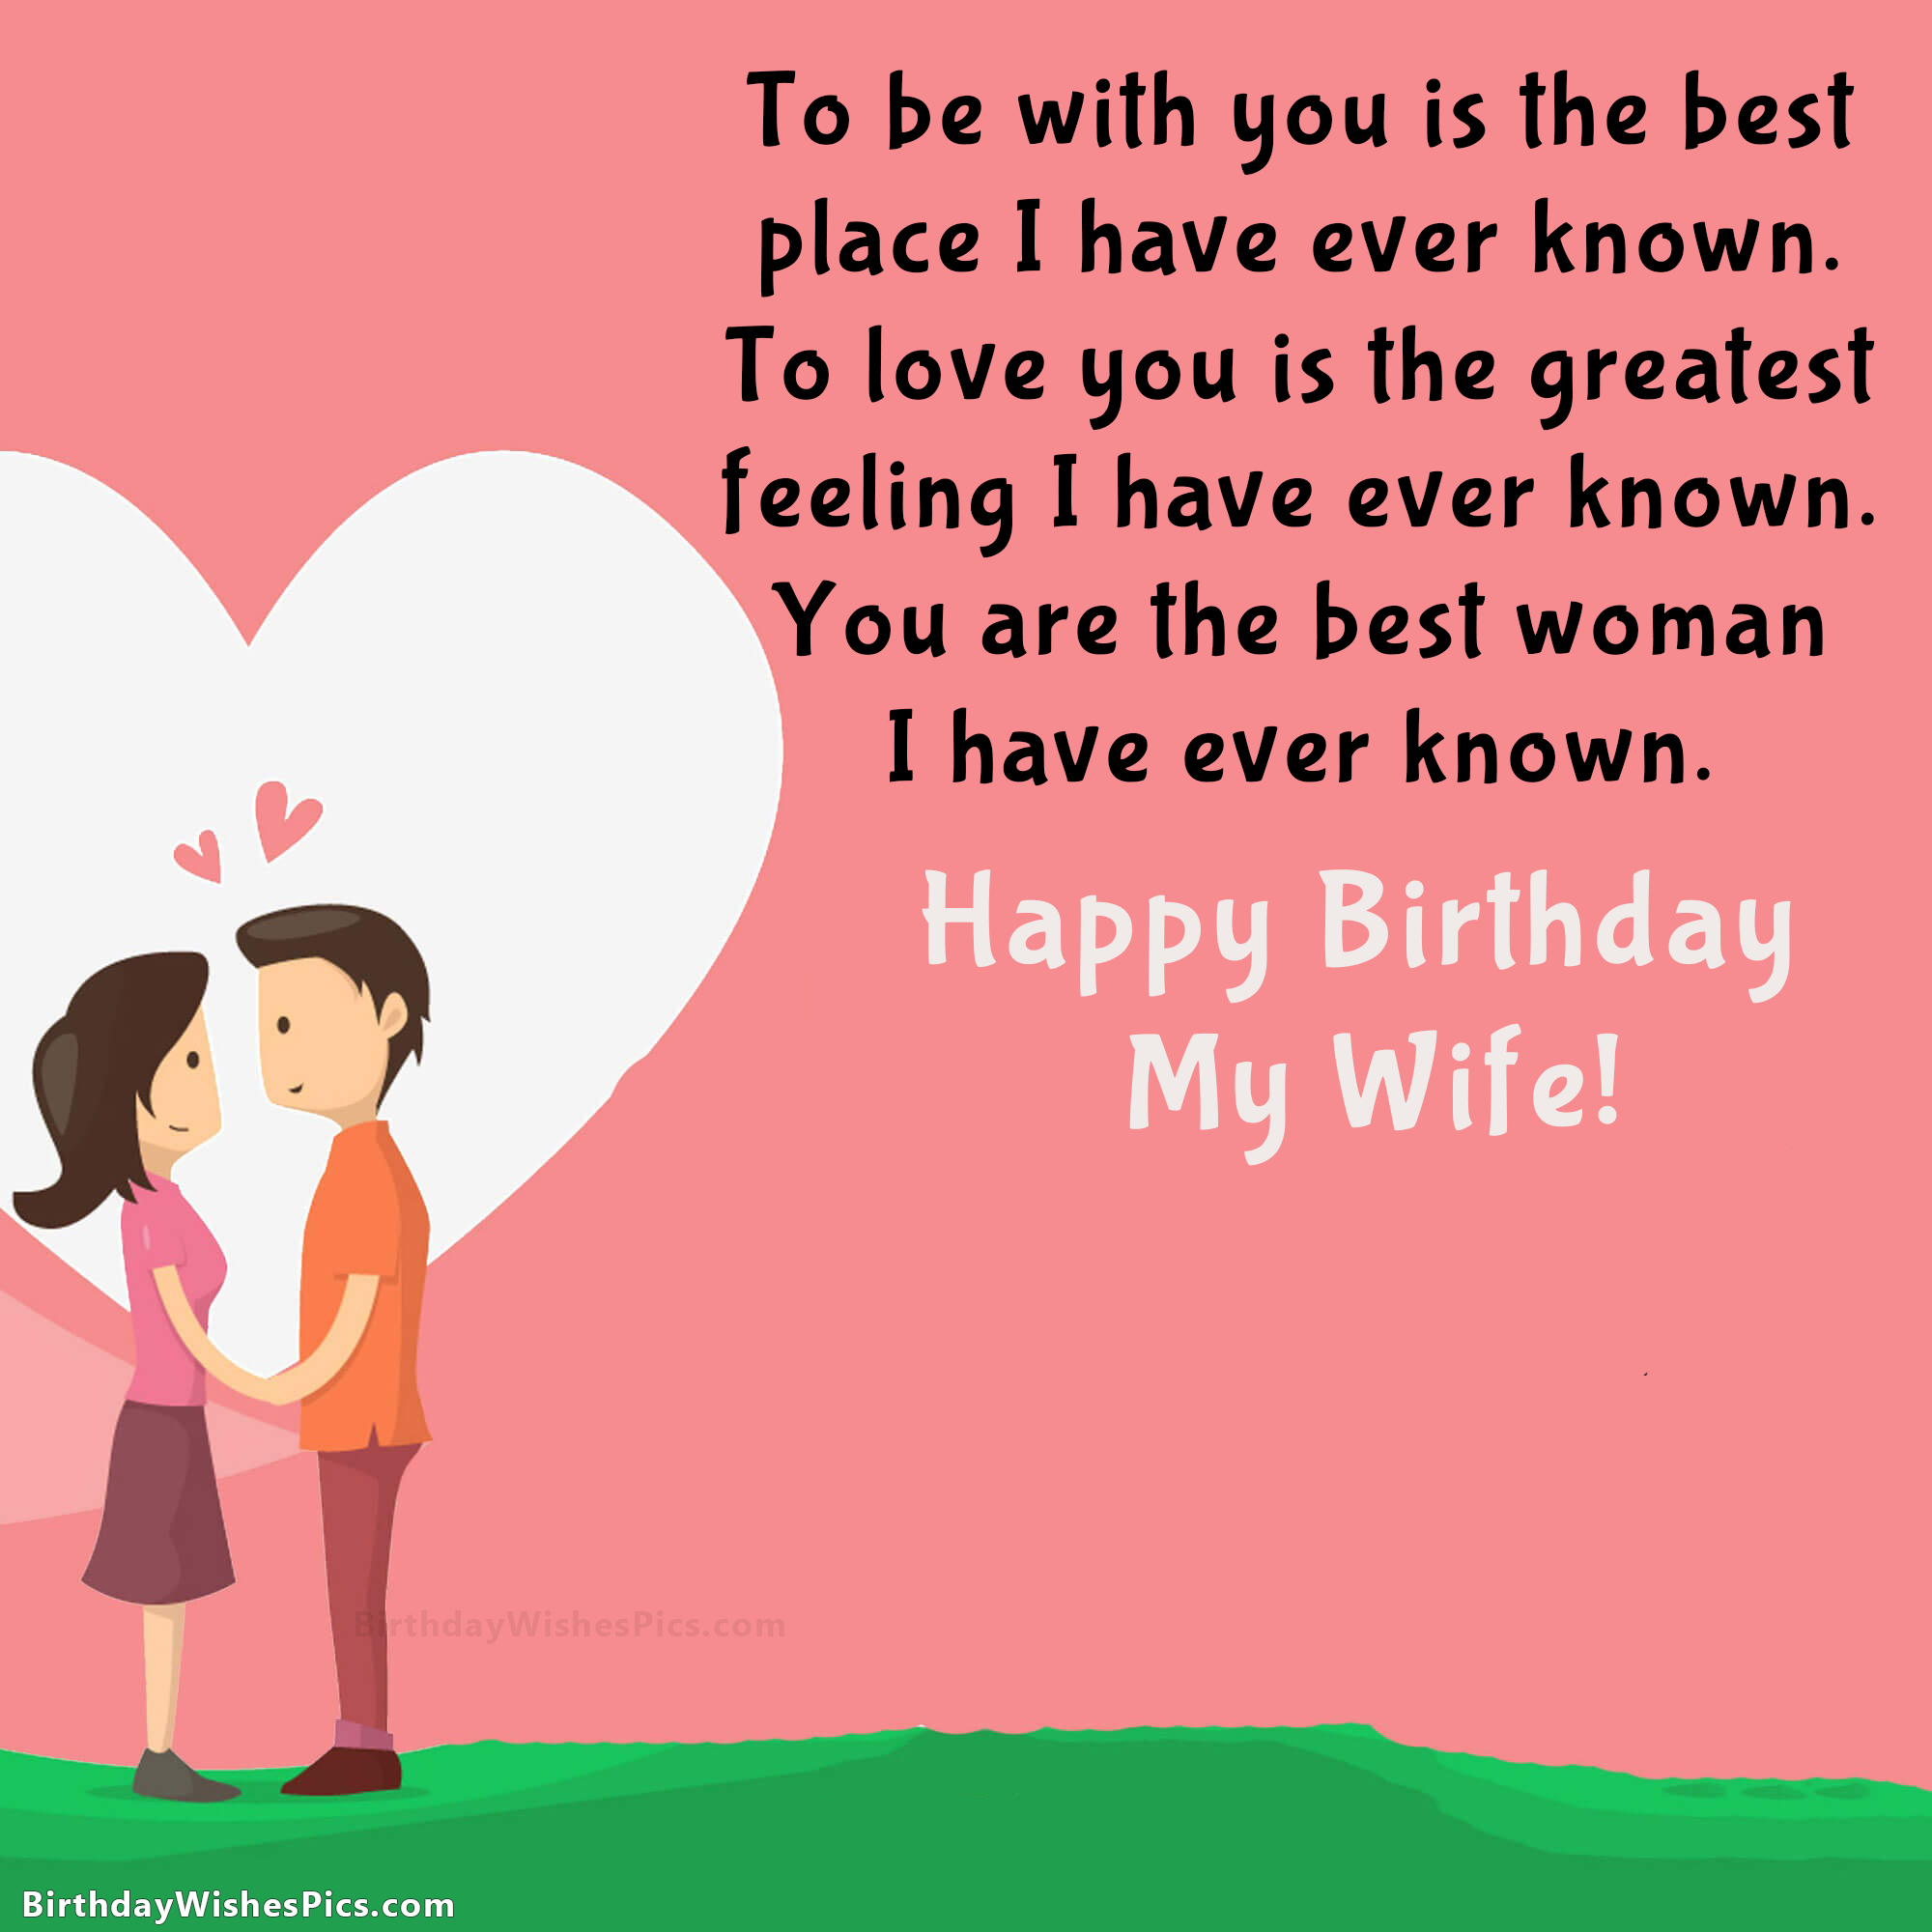 Happy Birthday Wishes For Wife With Romantic Image. Birthday wishes for wife, Best birthday wishes, Birthday wish for husband